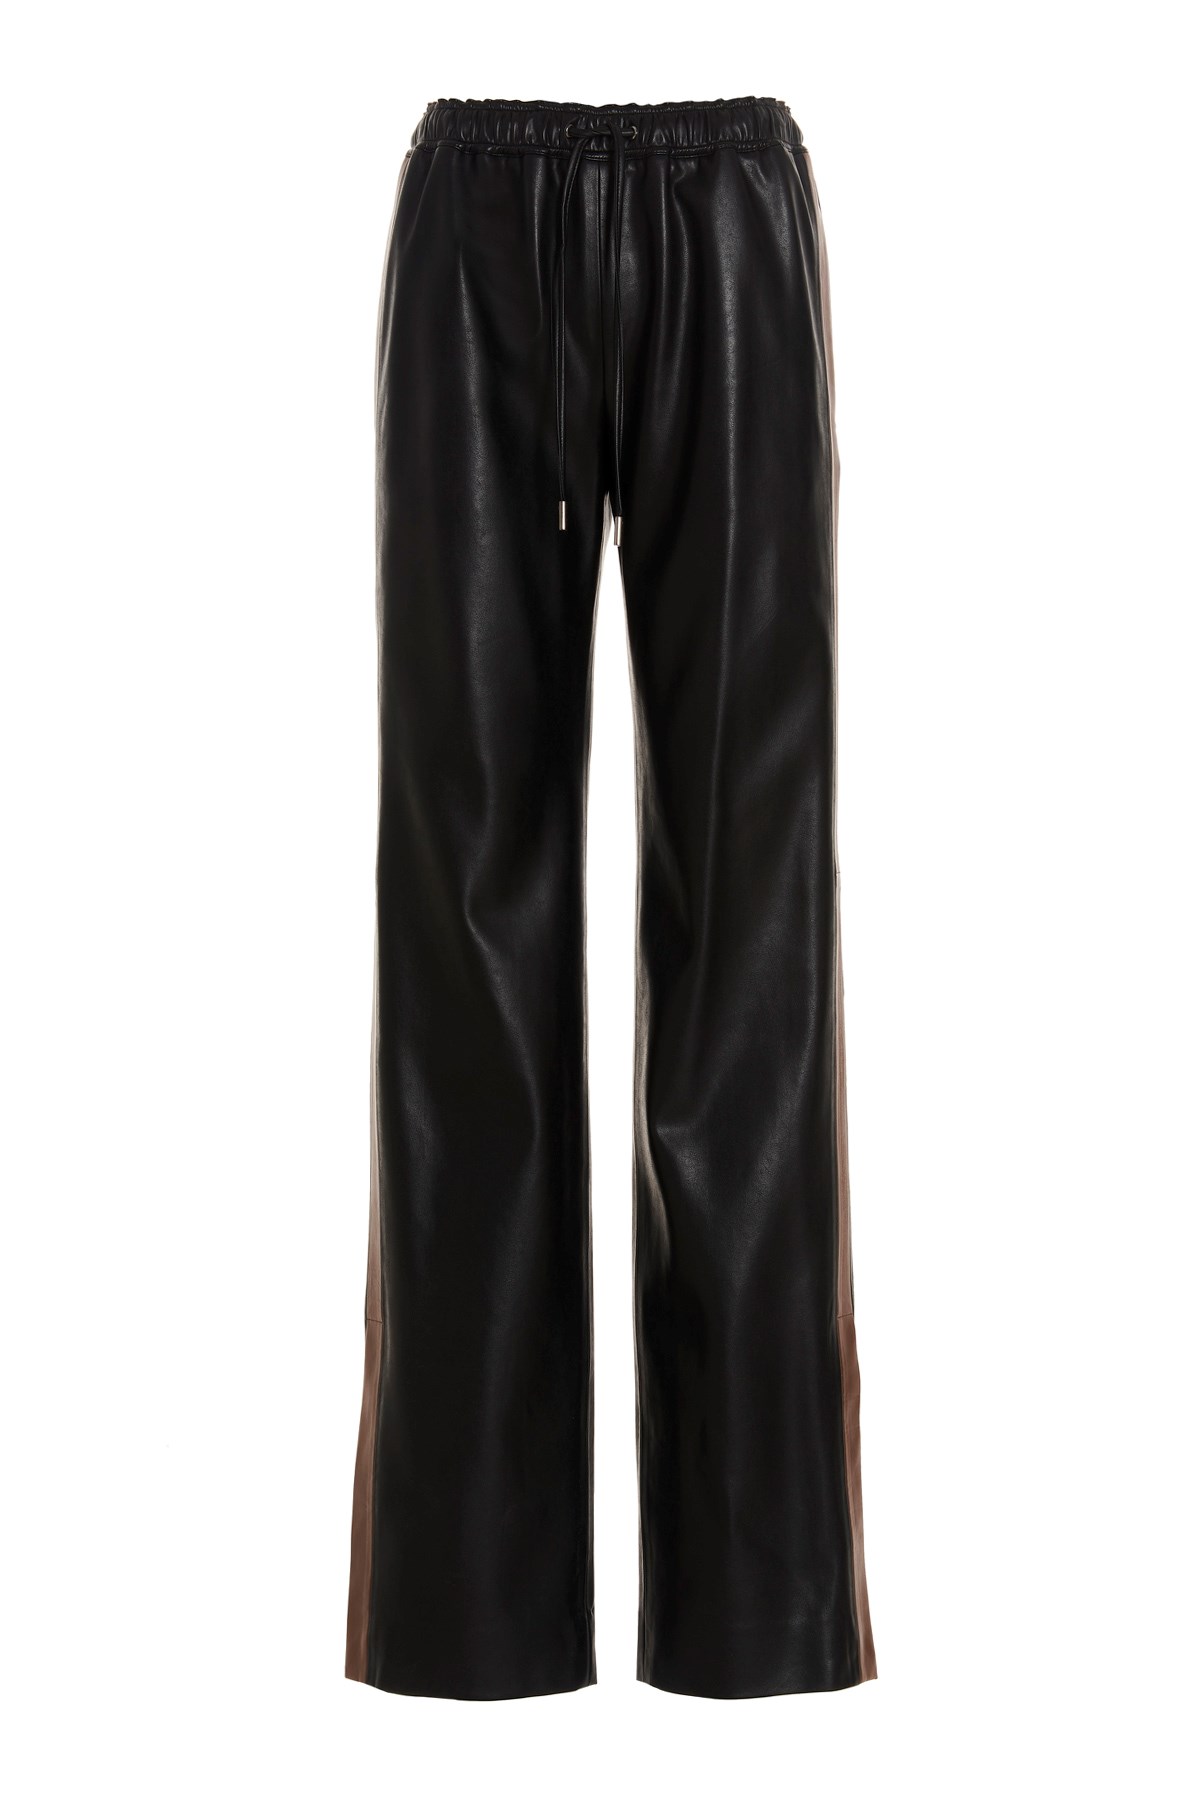 ERMANNO SCERVINO Band Detail Leather Trousers.